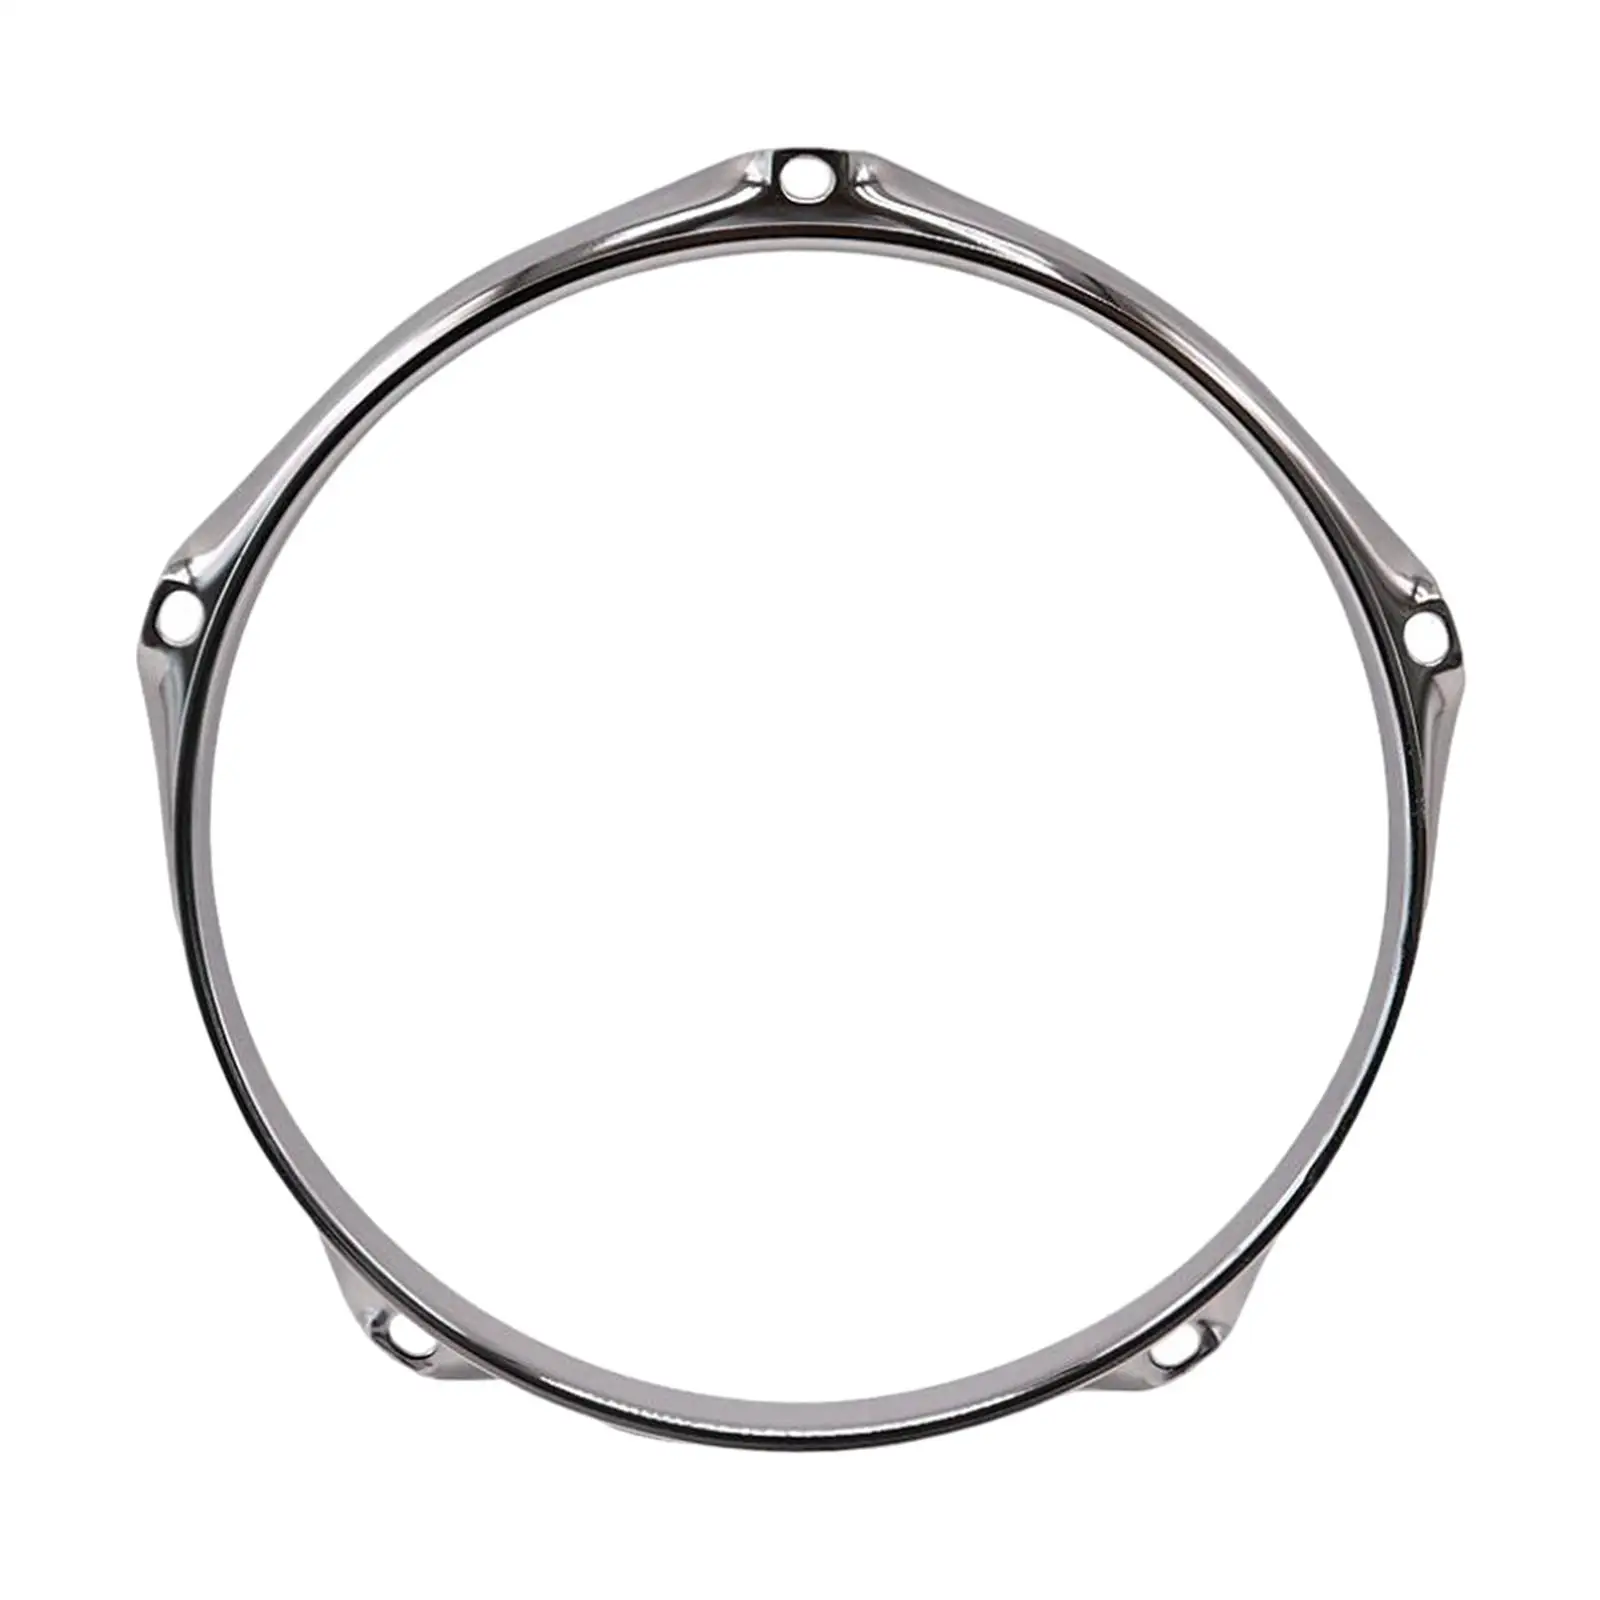 5 Holes Tom Drum Hoop Percussion Instrument Snare Drum Batter for Office